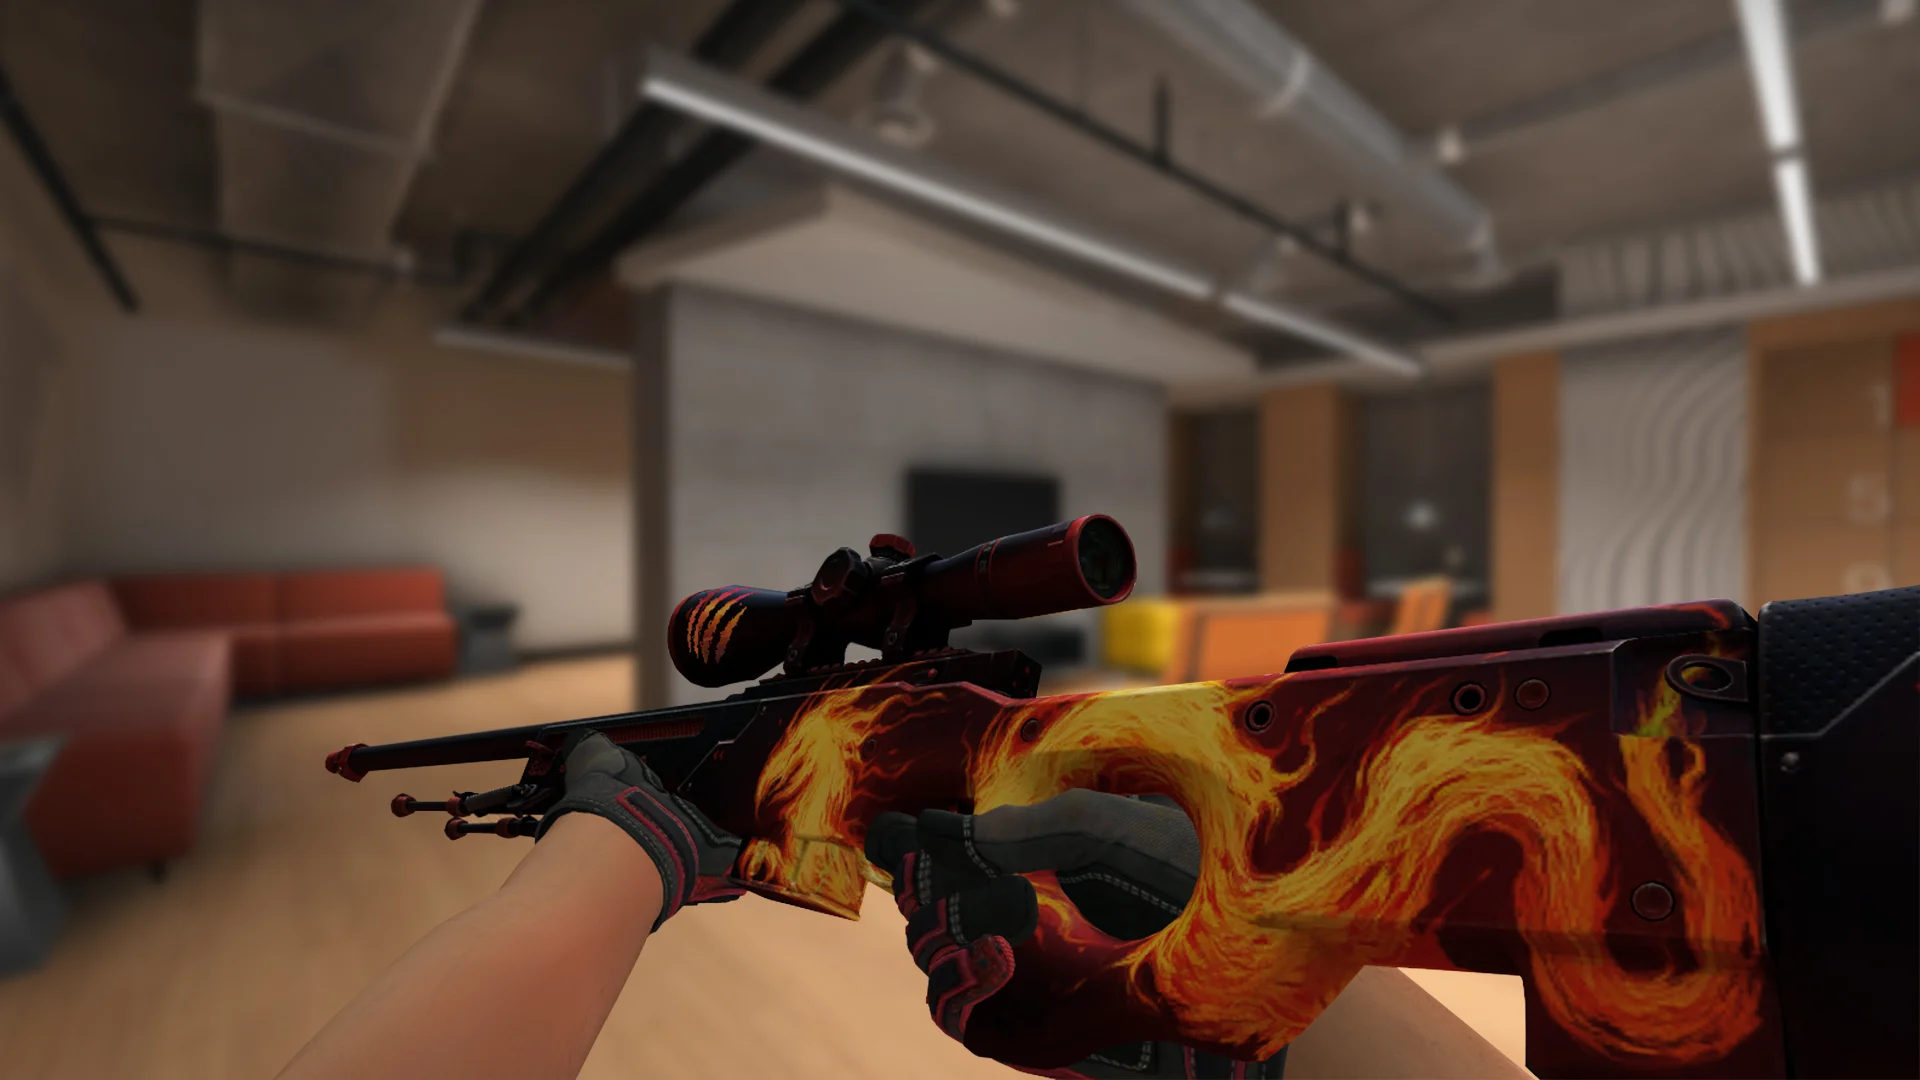 AWP Wildfire + 1x Battle Scarred (Holo) sticker on the scope